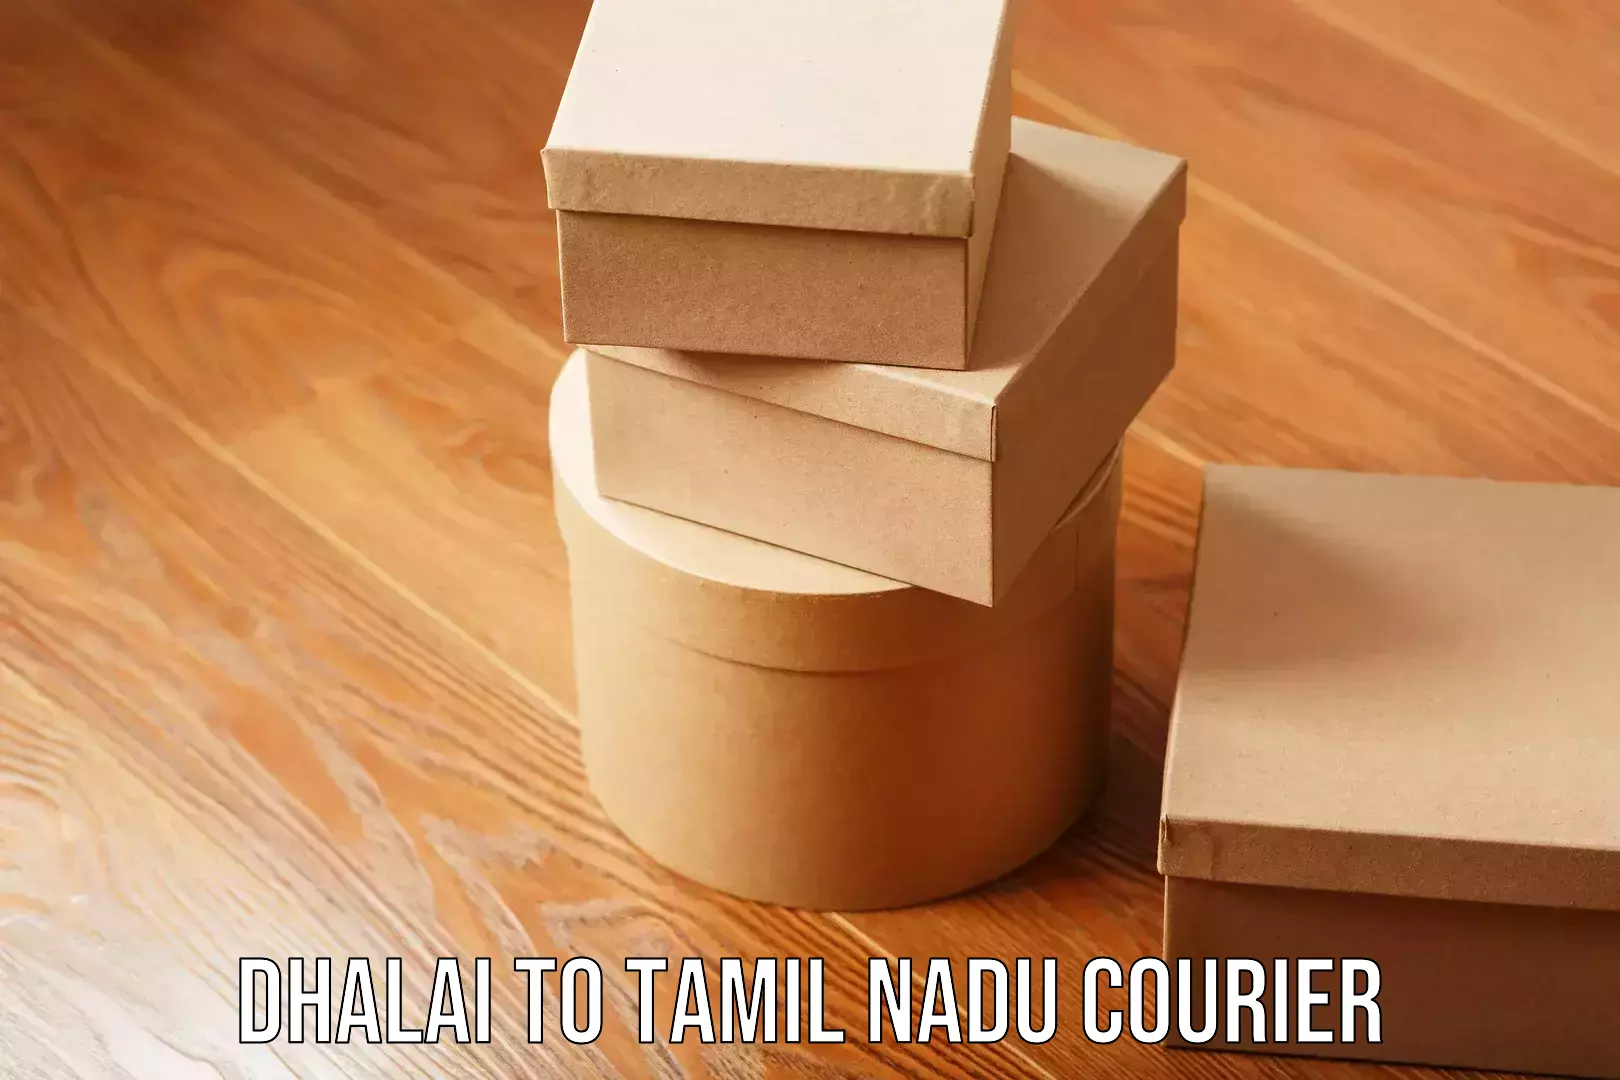 Cost-effective courier solutions Dhalai to Tamil Nadu